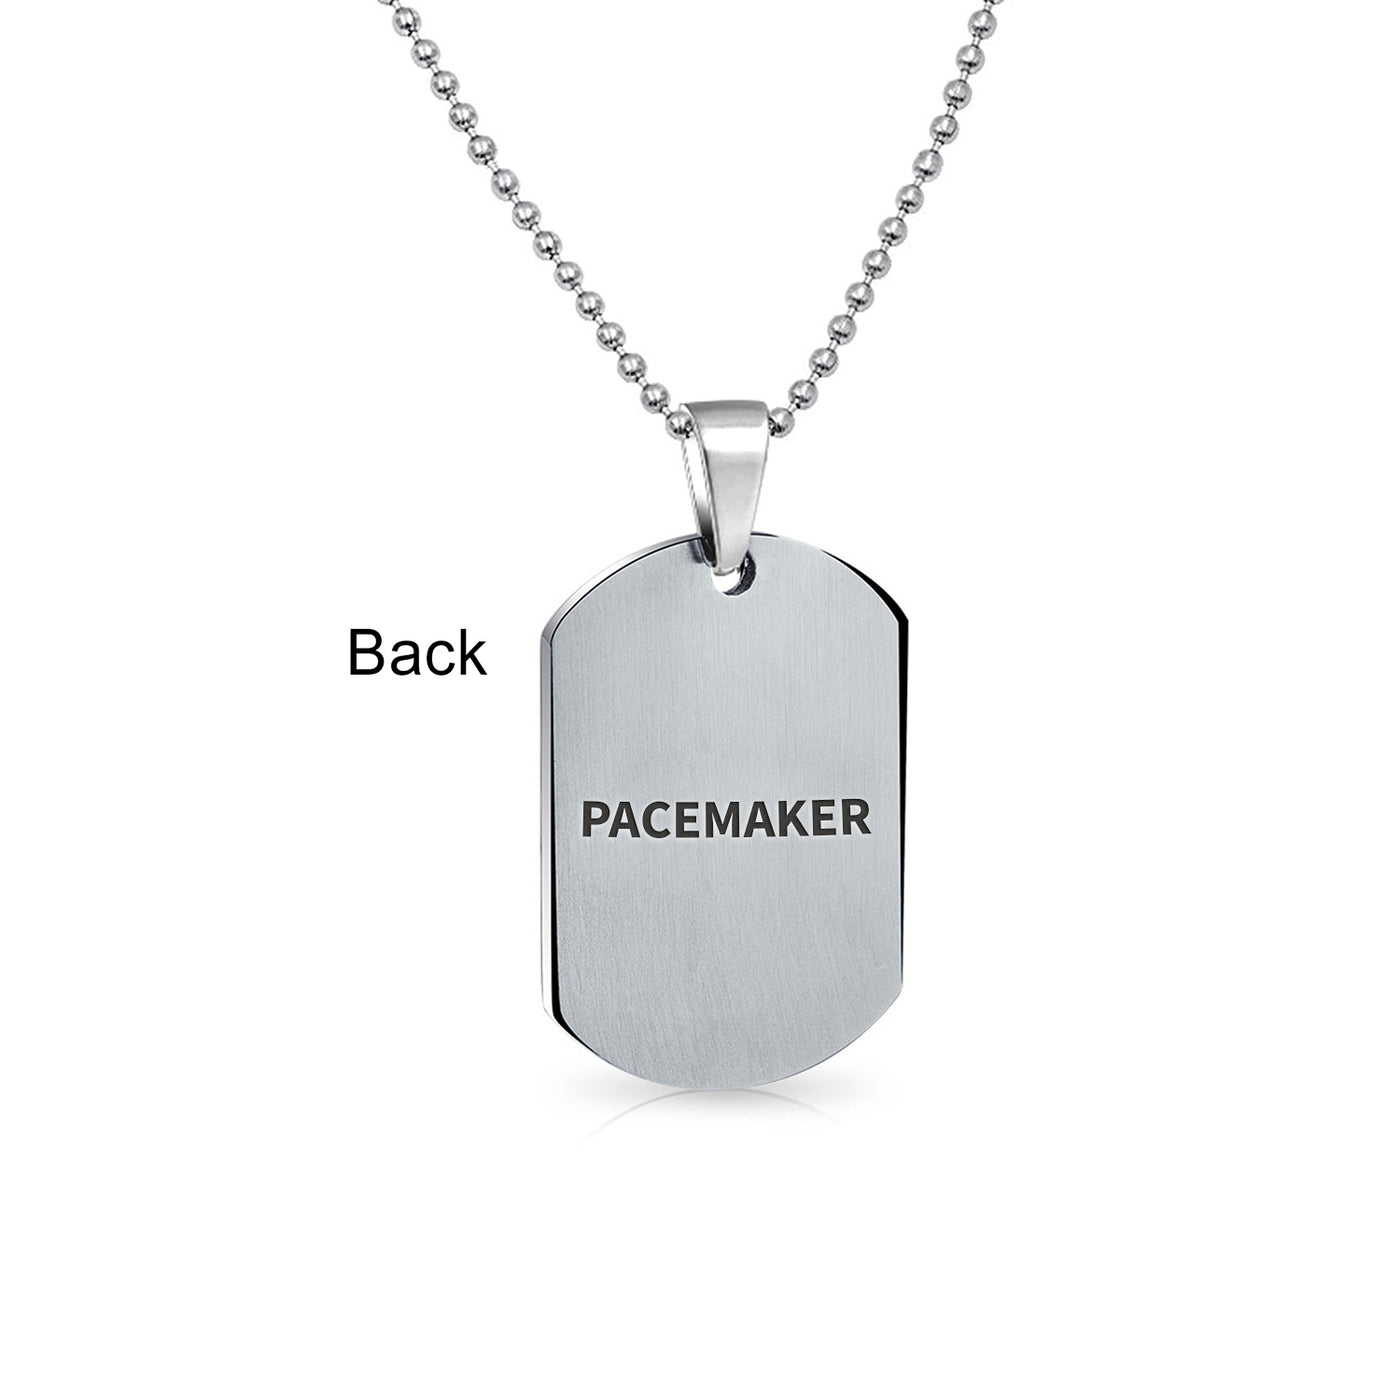 Pacemaker Small